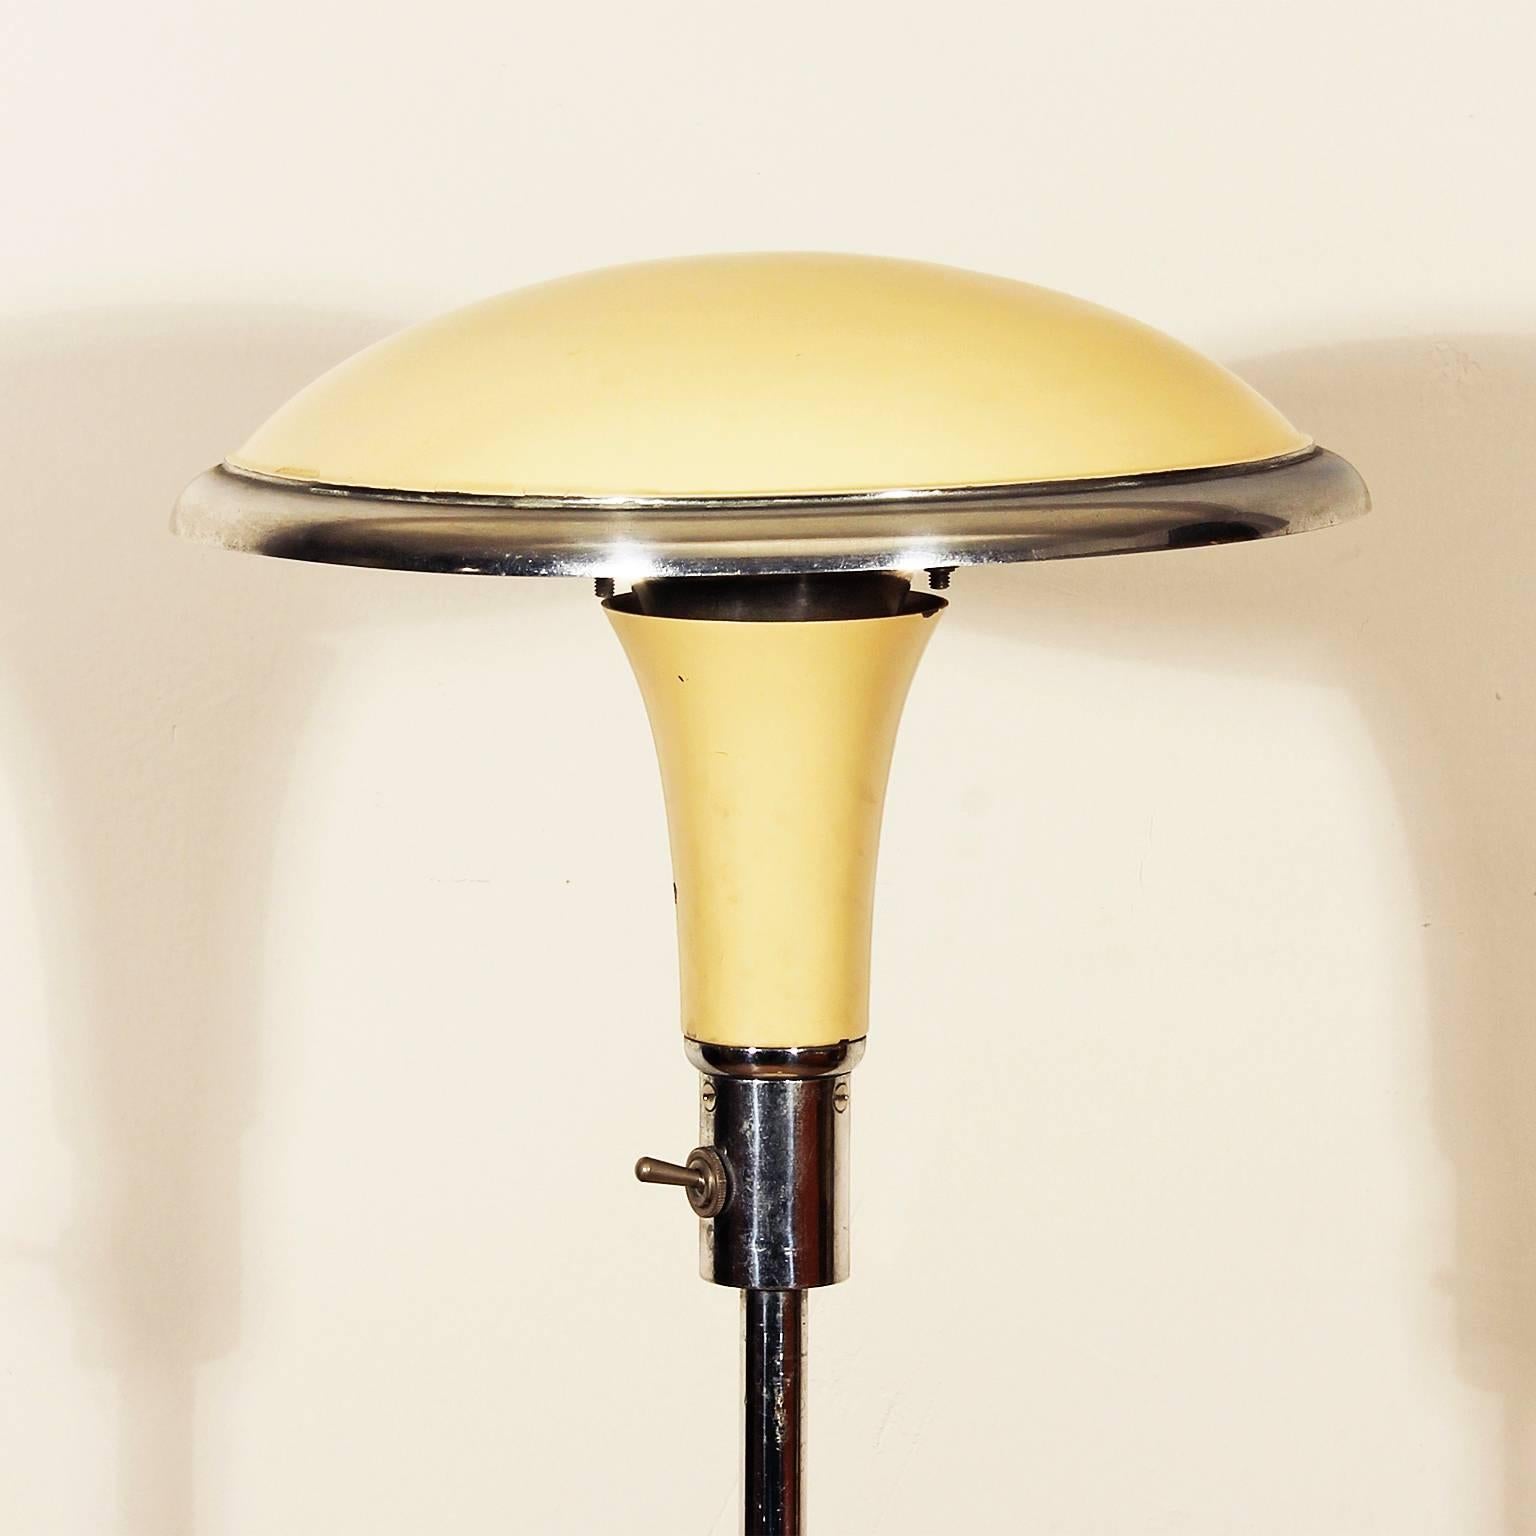 Lacquered 1930s Art Deco Floor Reading Lamp, lacquered and chromed sheet metal - France